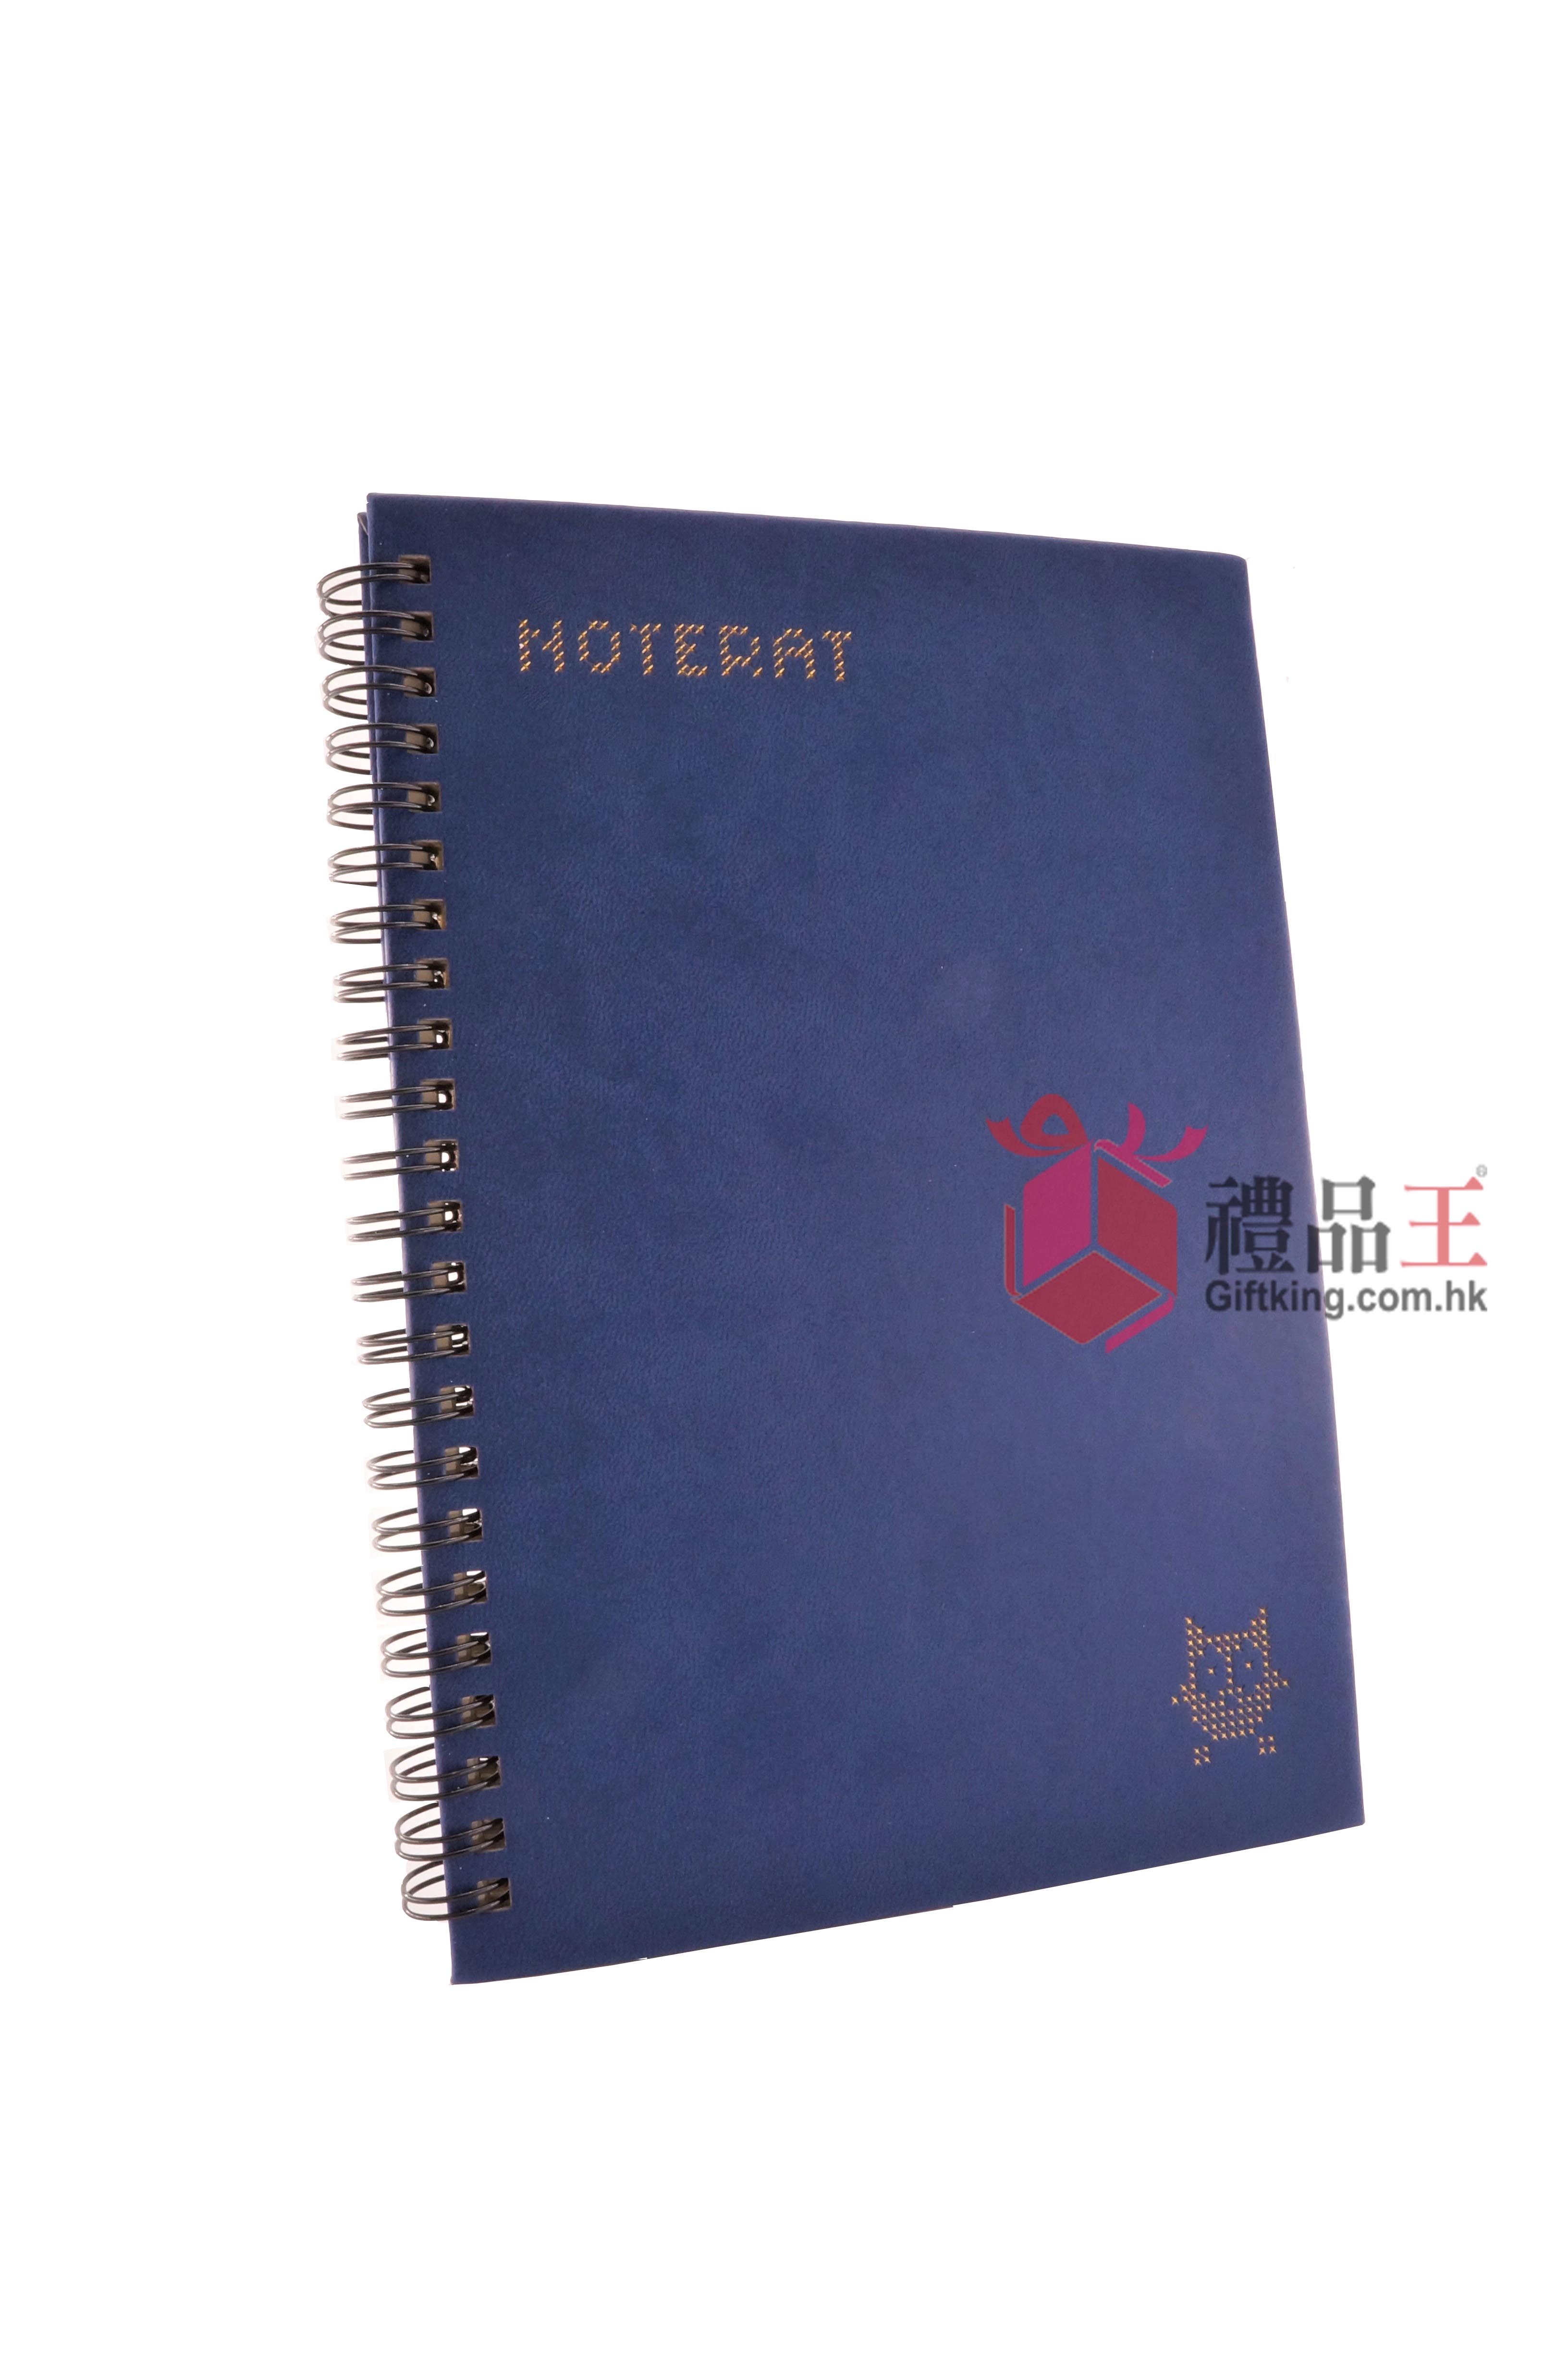 CONSULATE-GENERAL HONG KONG Coil Notebook(Stationery Gift)